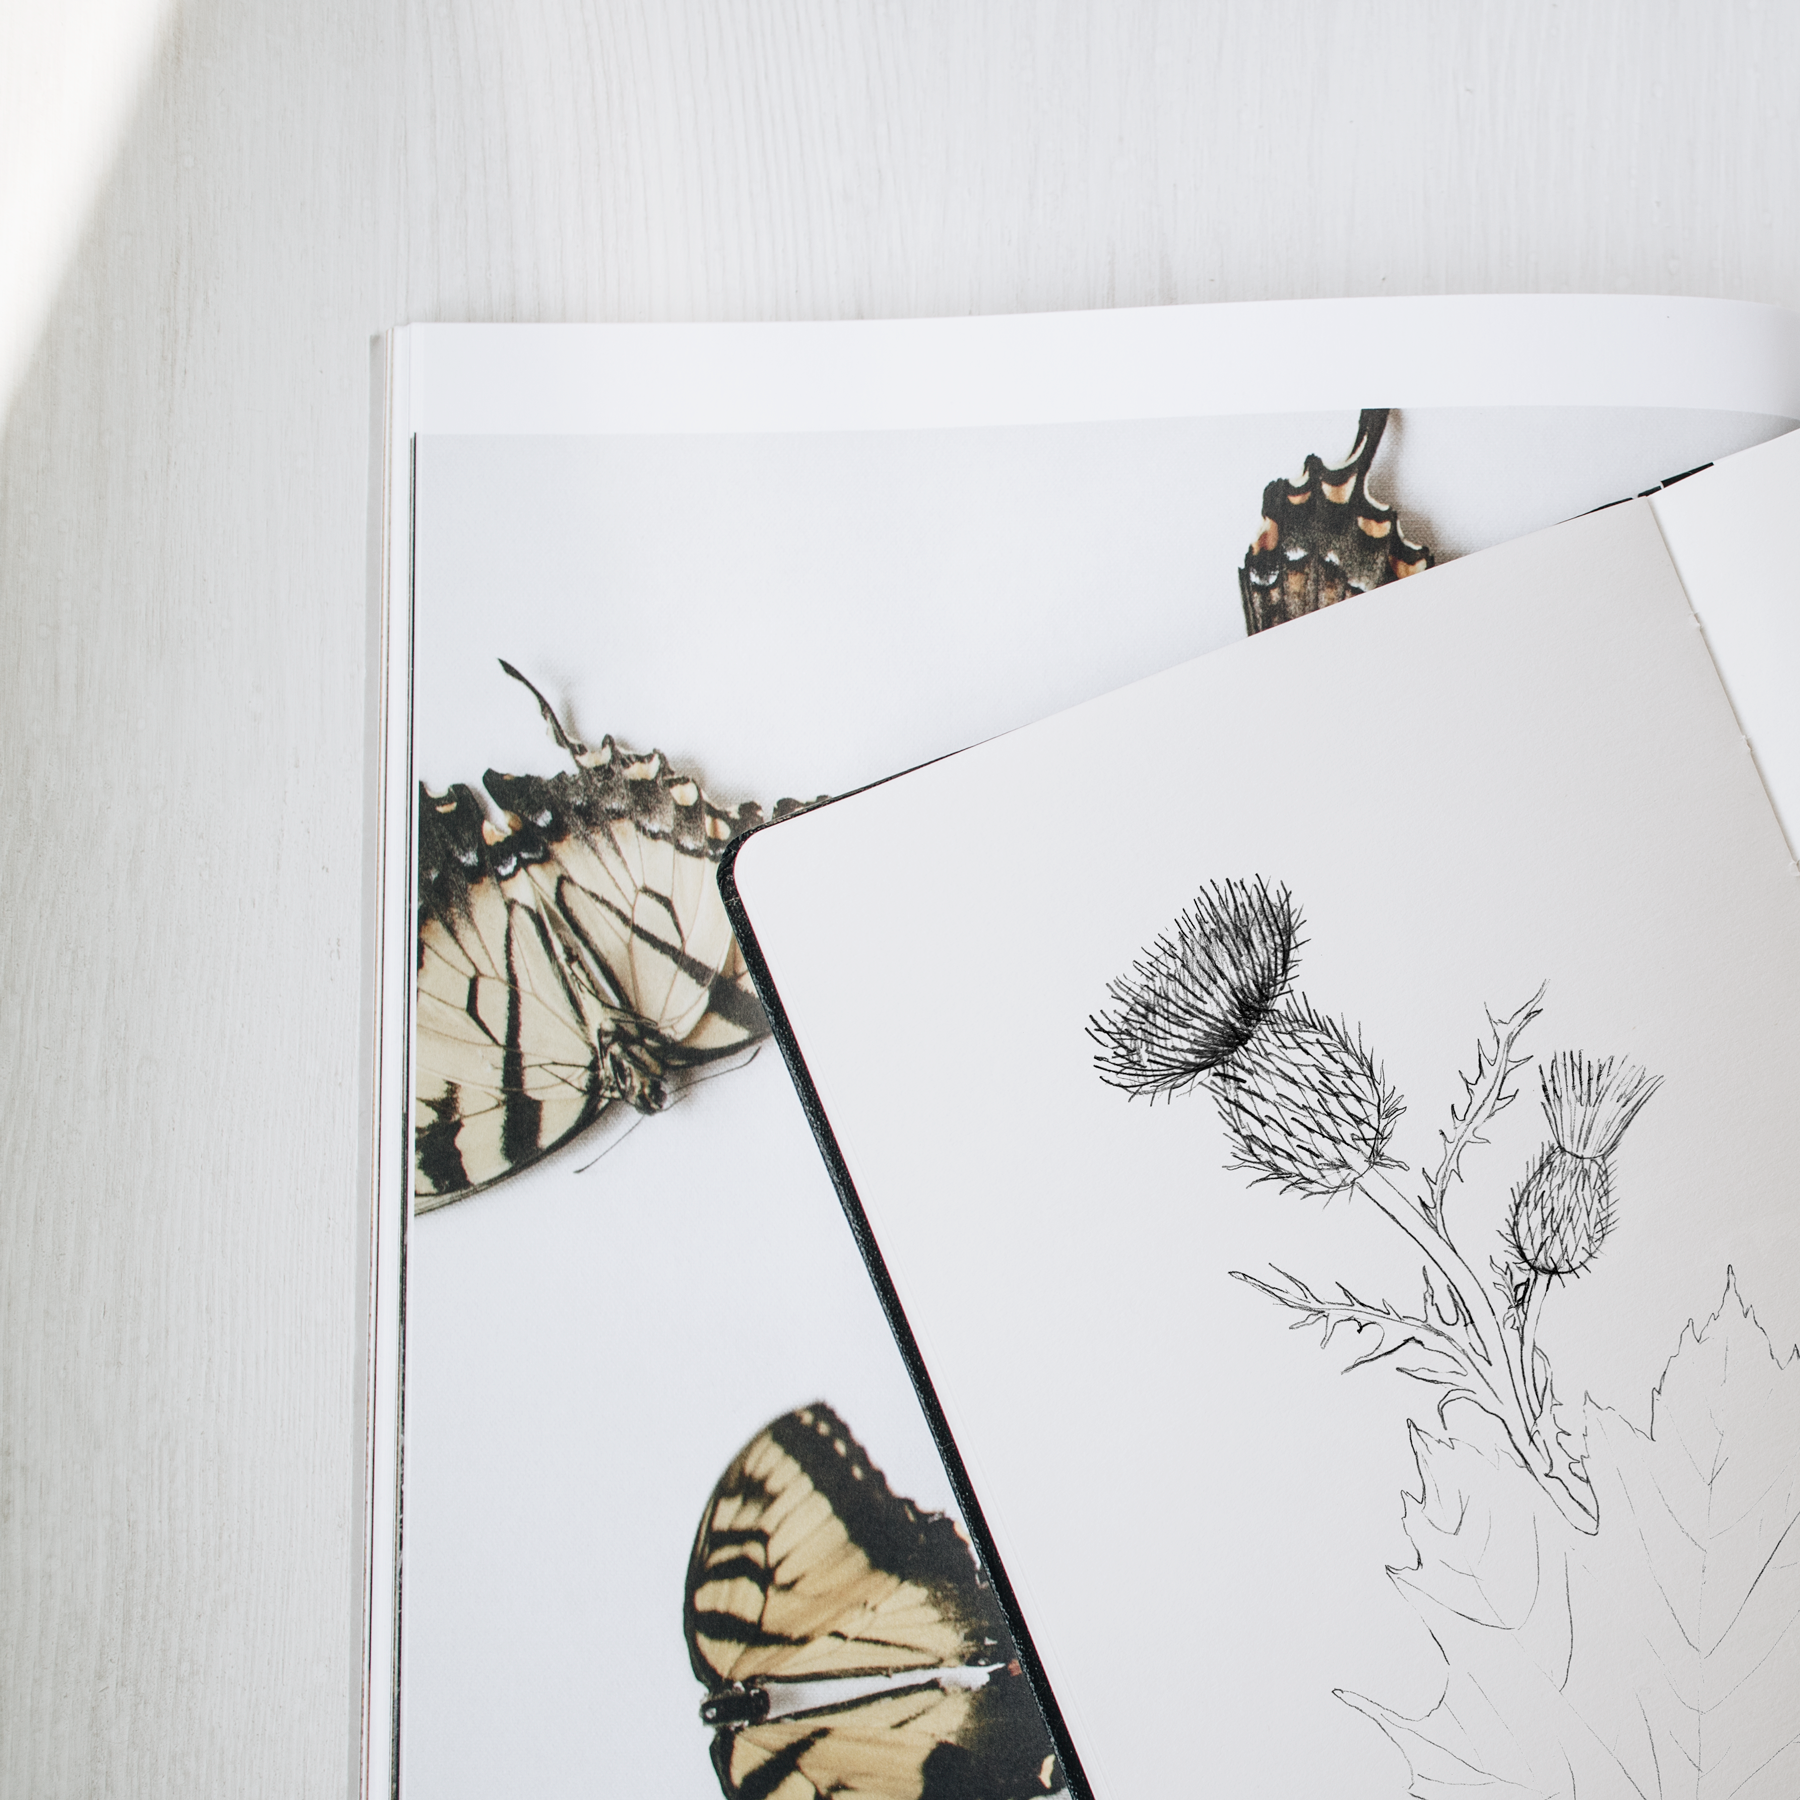 Botanical sketchbook. A note on plant drawing — Anna Farba